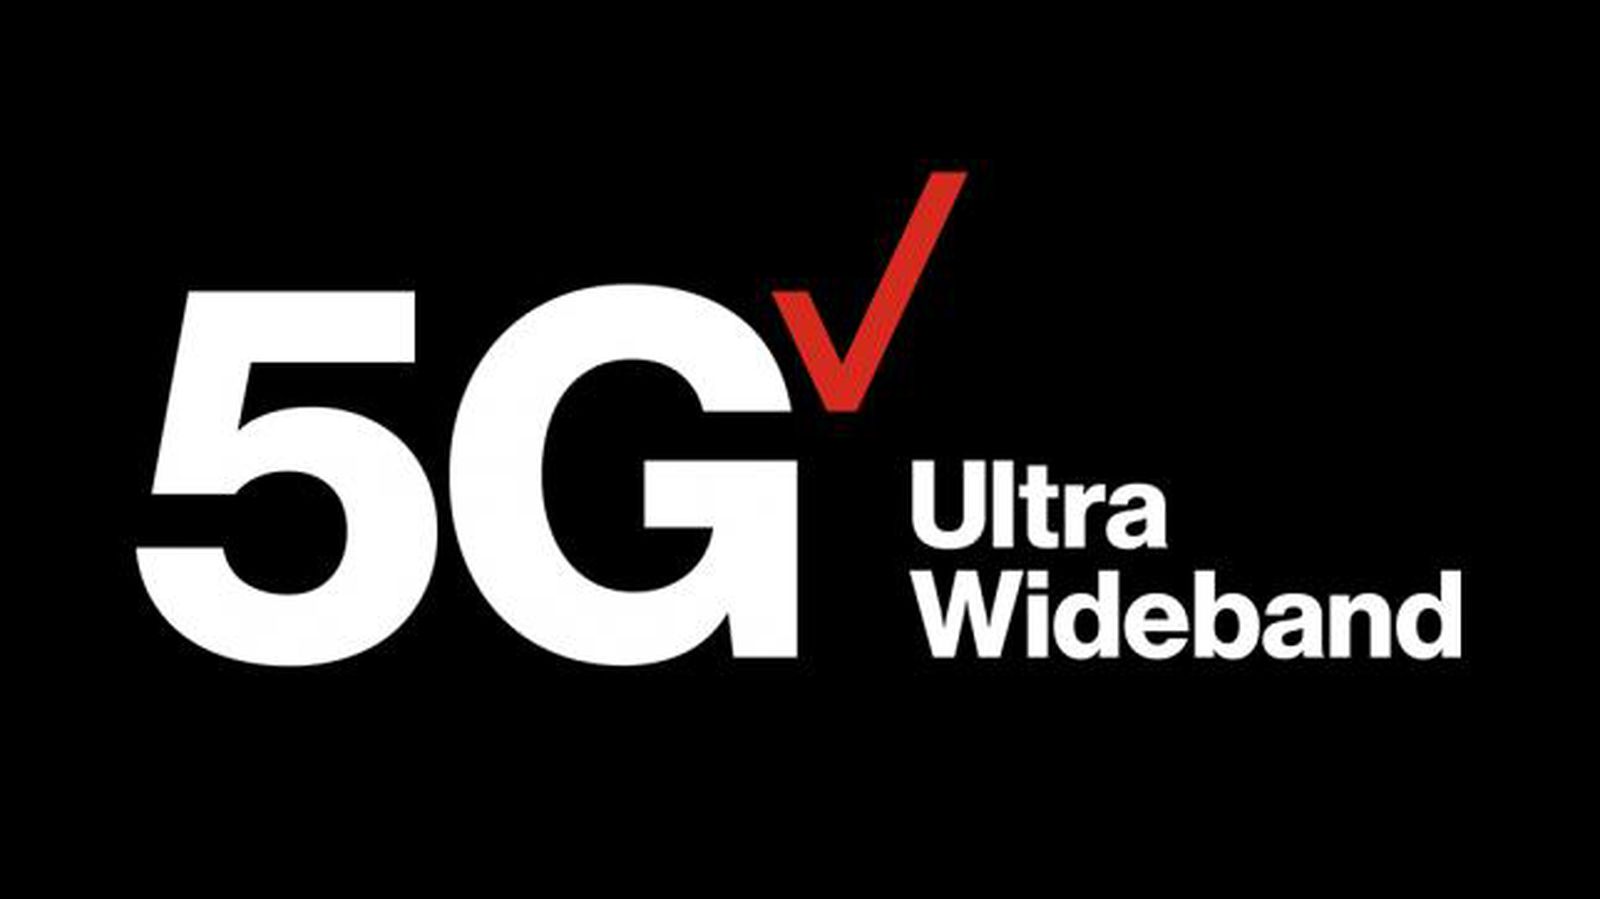 Verizon Announces Plans to Expand 5G Ultra Wideband to 1,700 Cities in January, ..